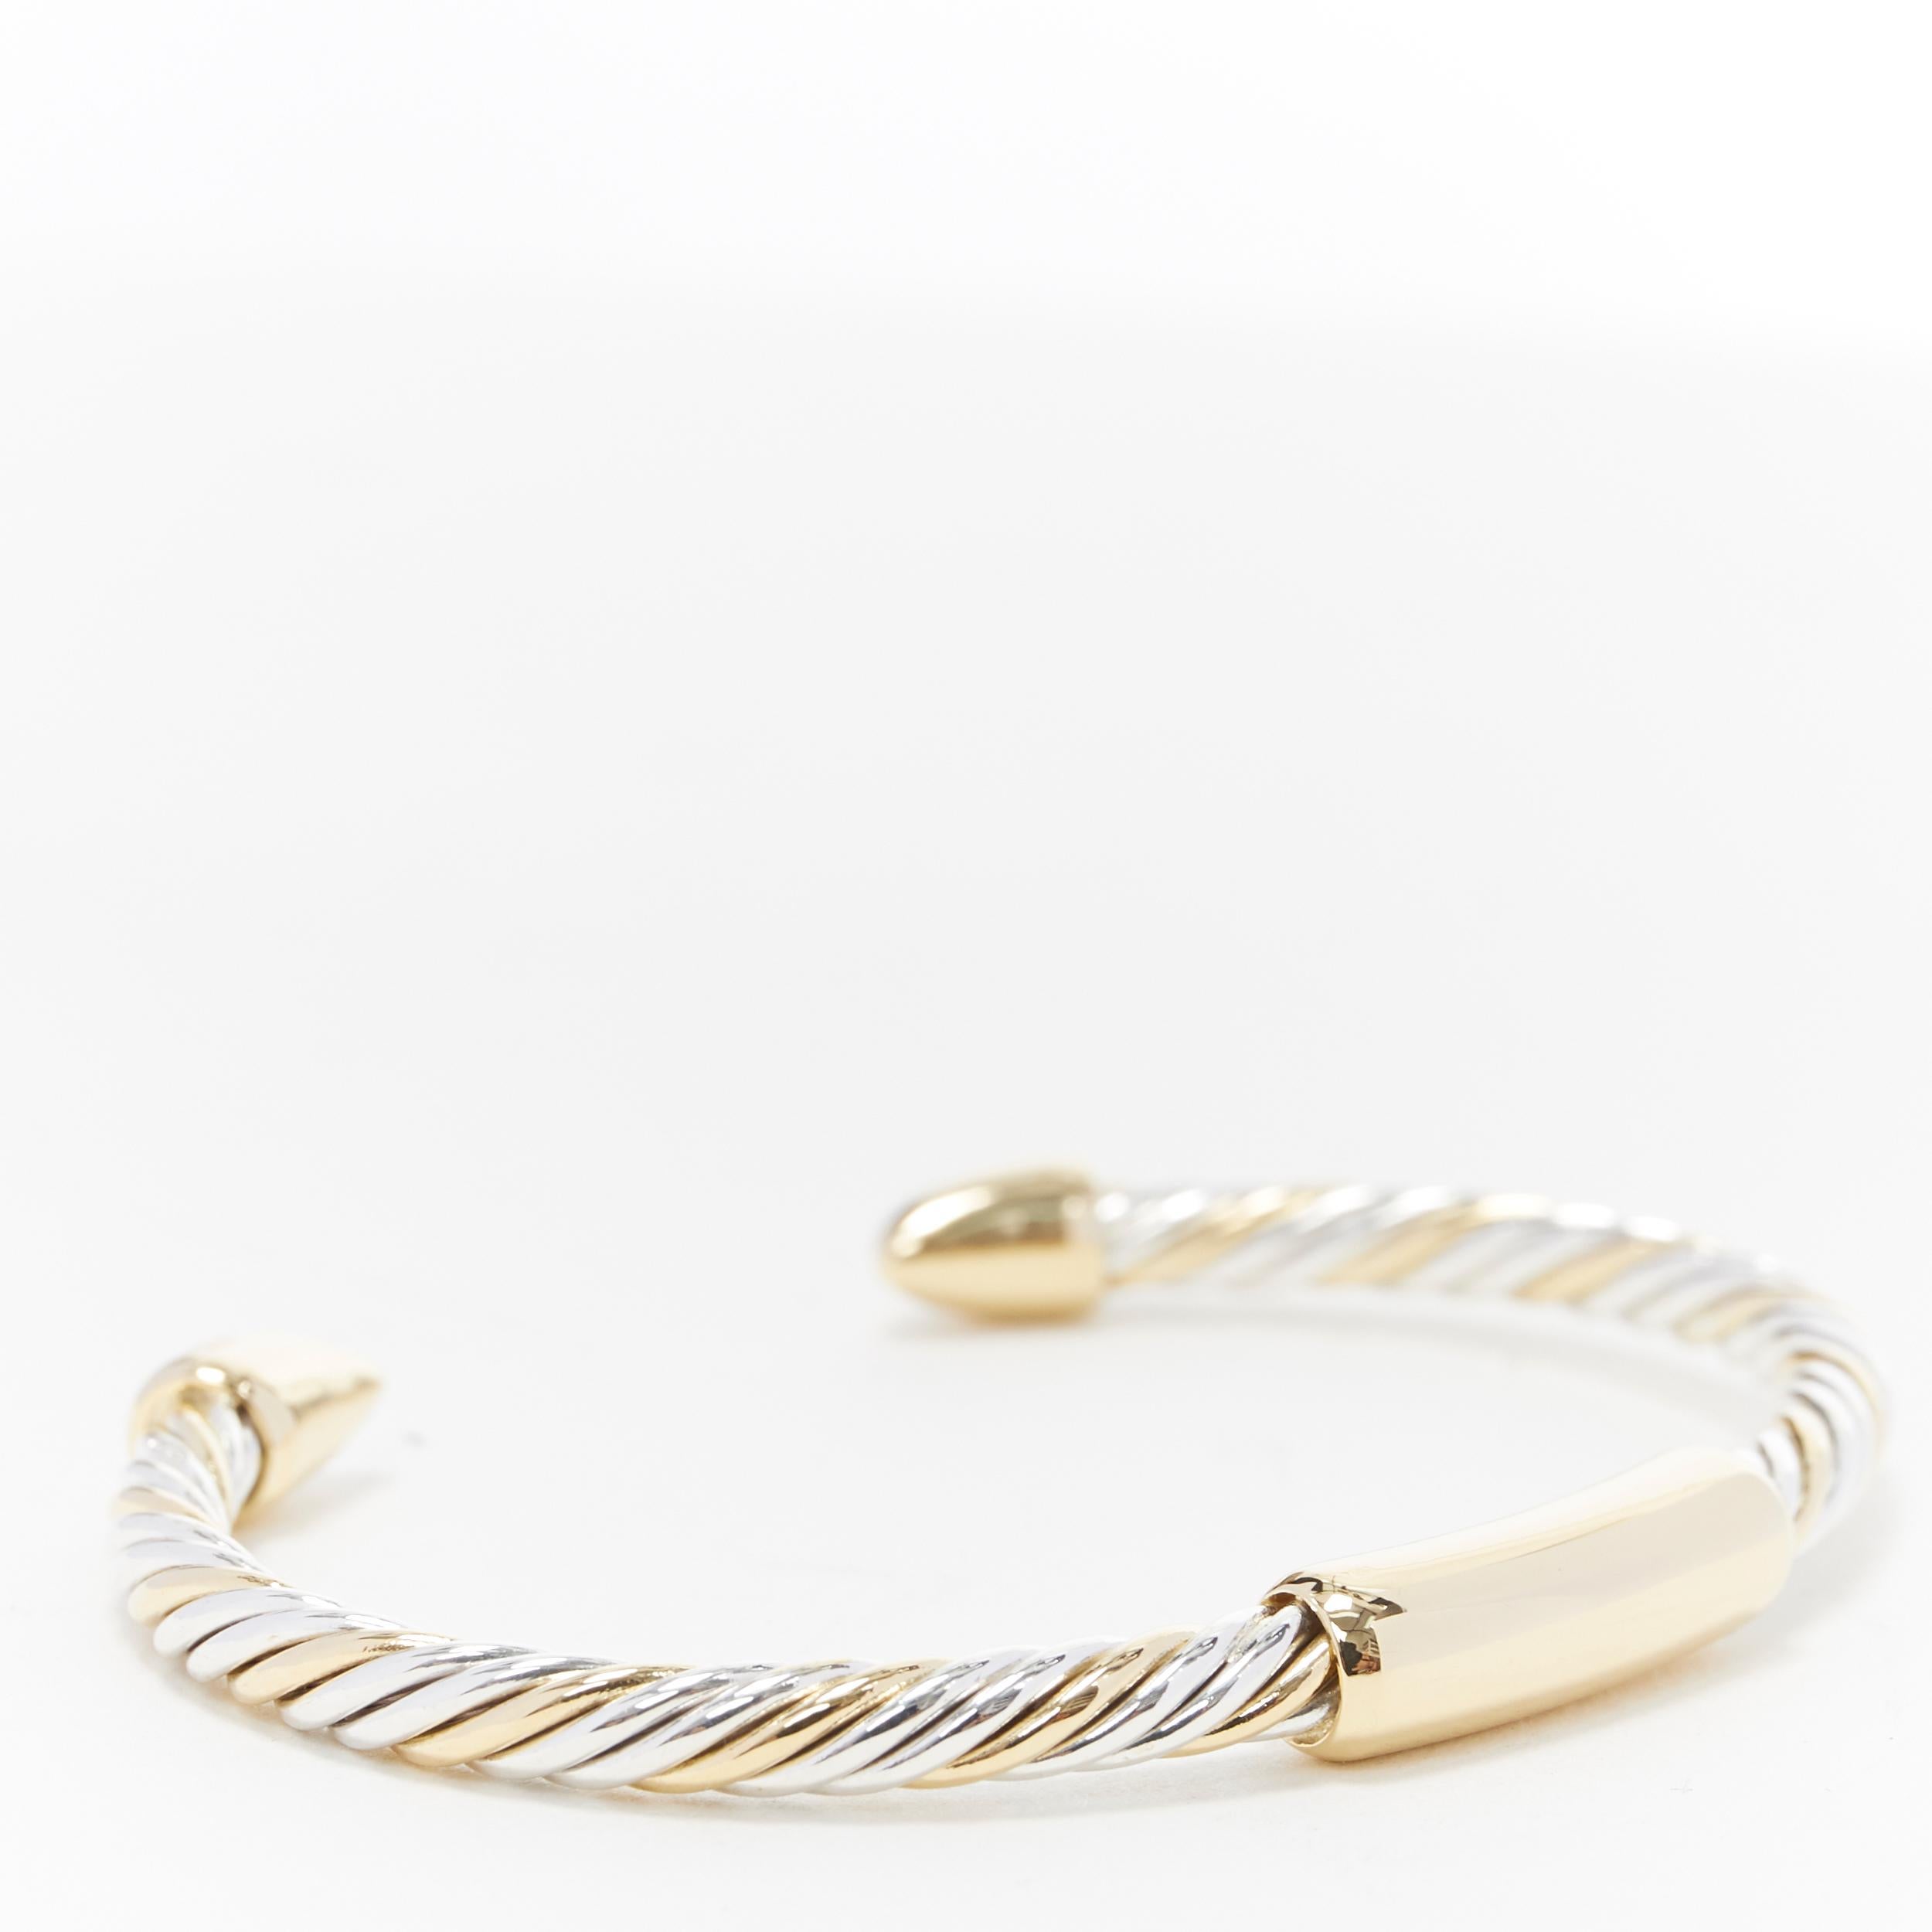 vintage BULGARI JEWELLERY 18k yellow white gold twist bangle cuff bracelet 
Reference: EHKO/A00005 
Brand: Bulgari 
Material: Yellow gold 
Color: Gold 
Pattern: Solid 
Extra Detail: 18k yellow and white gold. Italian twist. Gold stud at opening.